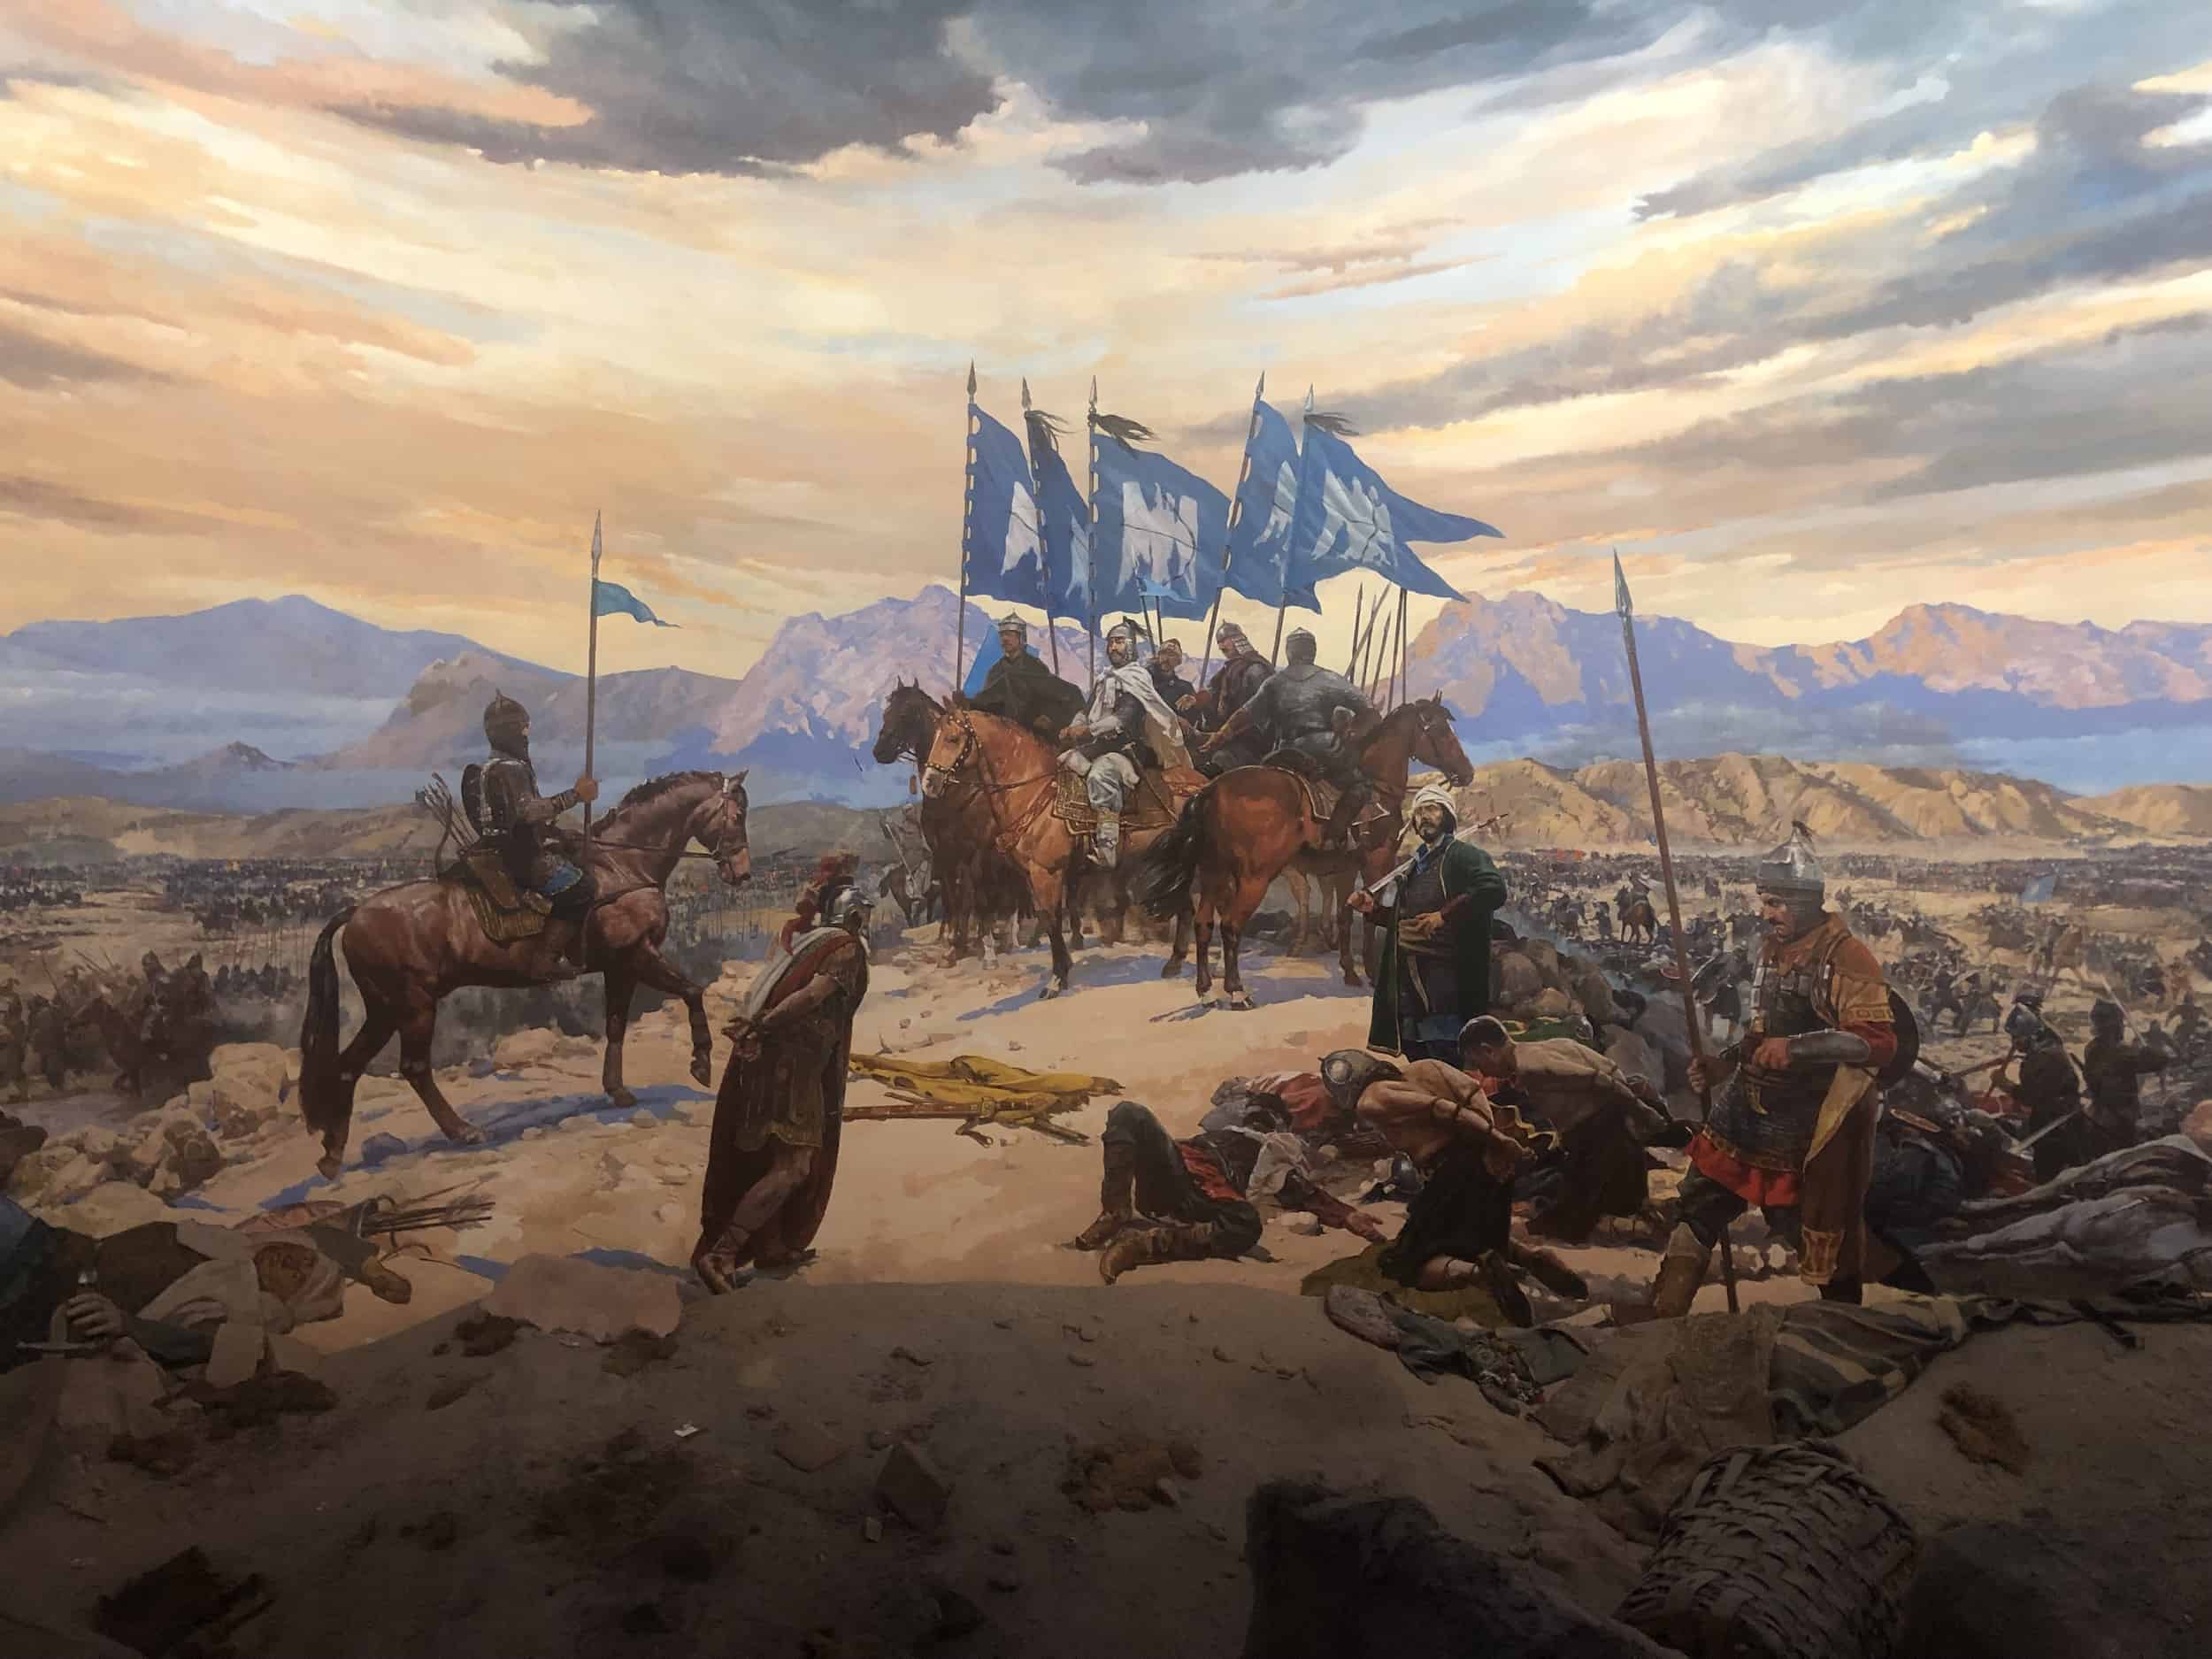 Battle of Manzikert in the Seljuk Hall at the Harbiye Military Museum in Istanbul, Turkey